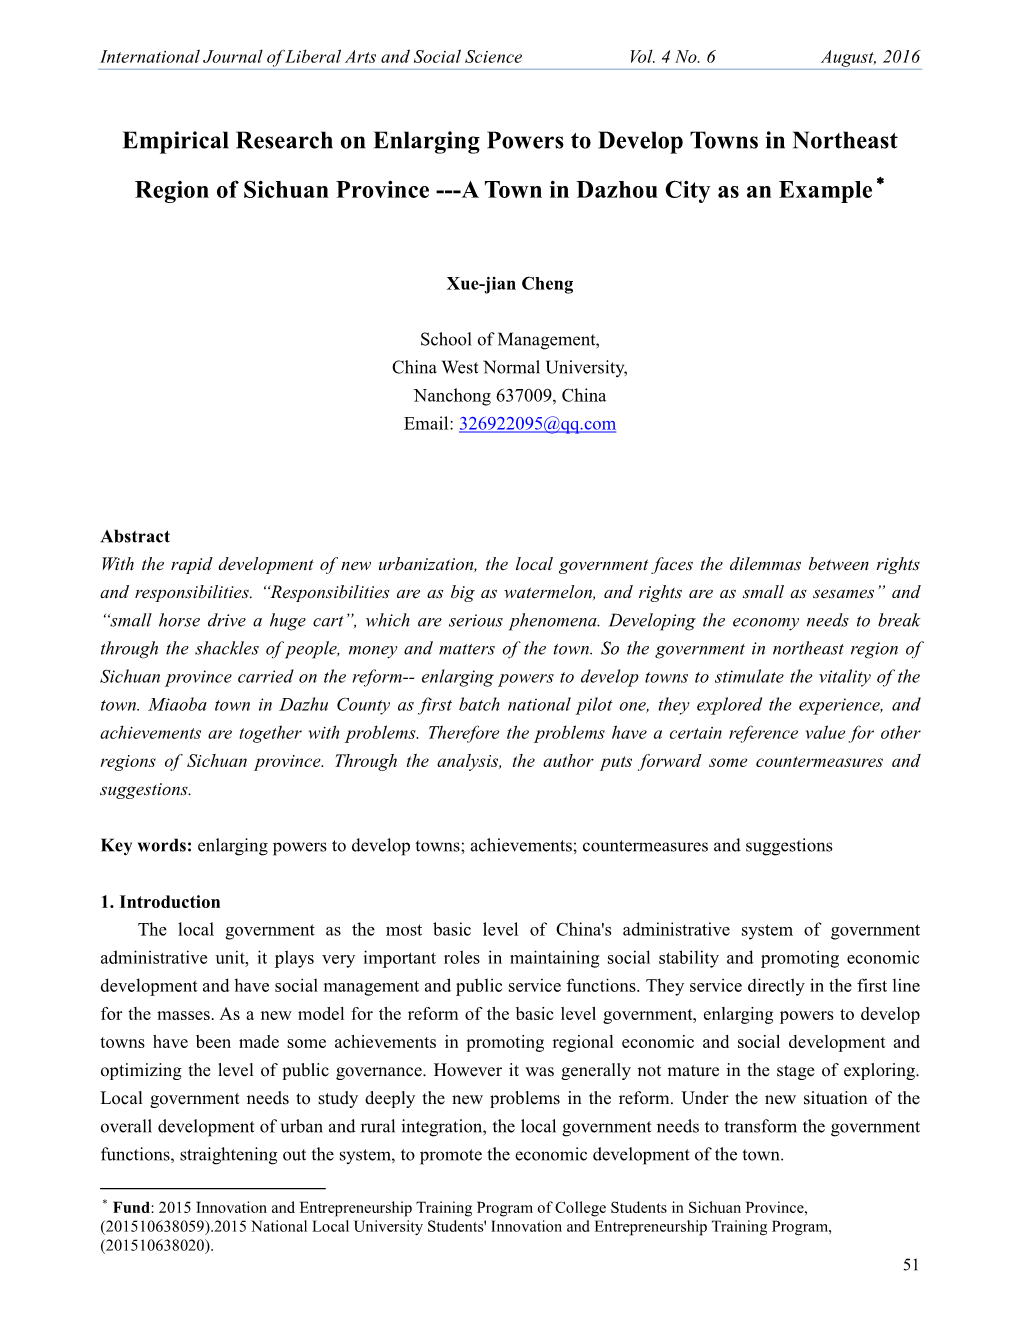 Empirical Research on Enlarging Powers to Develop Towns in Northeast Region of Sichuan Province ---A Town in Dazhou City As an Example ∗